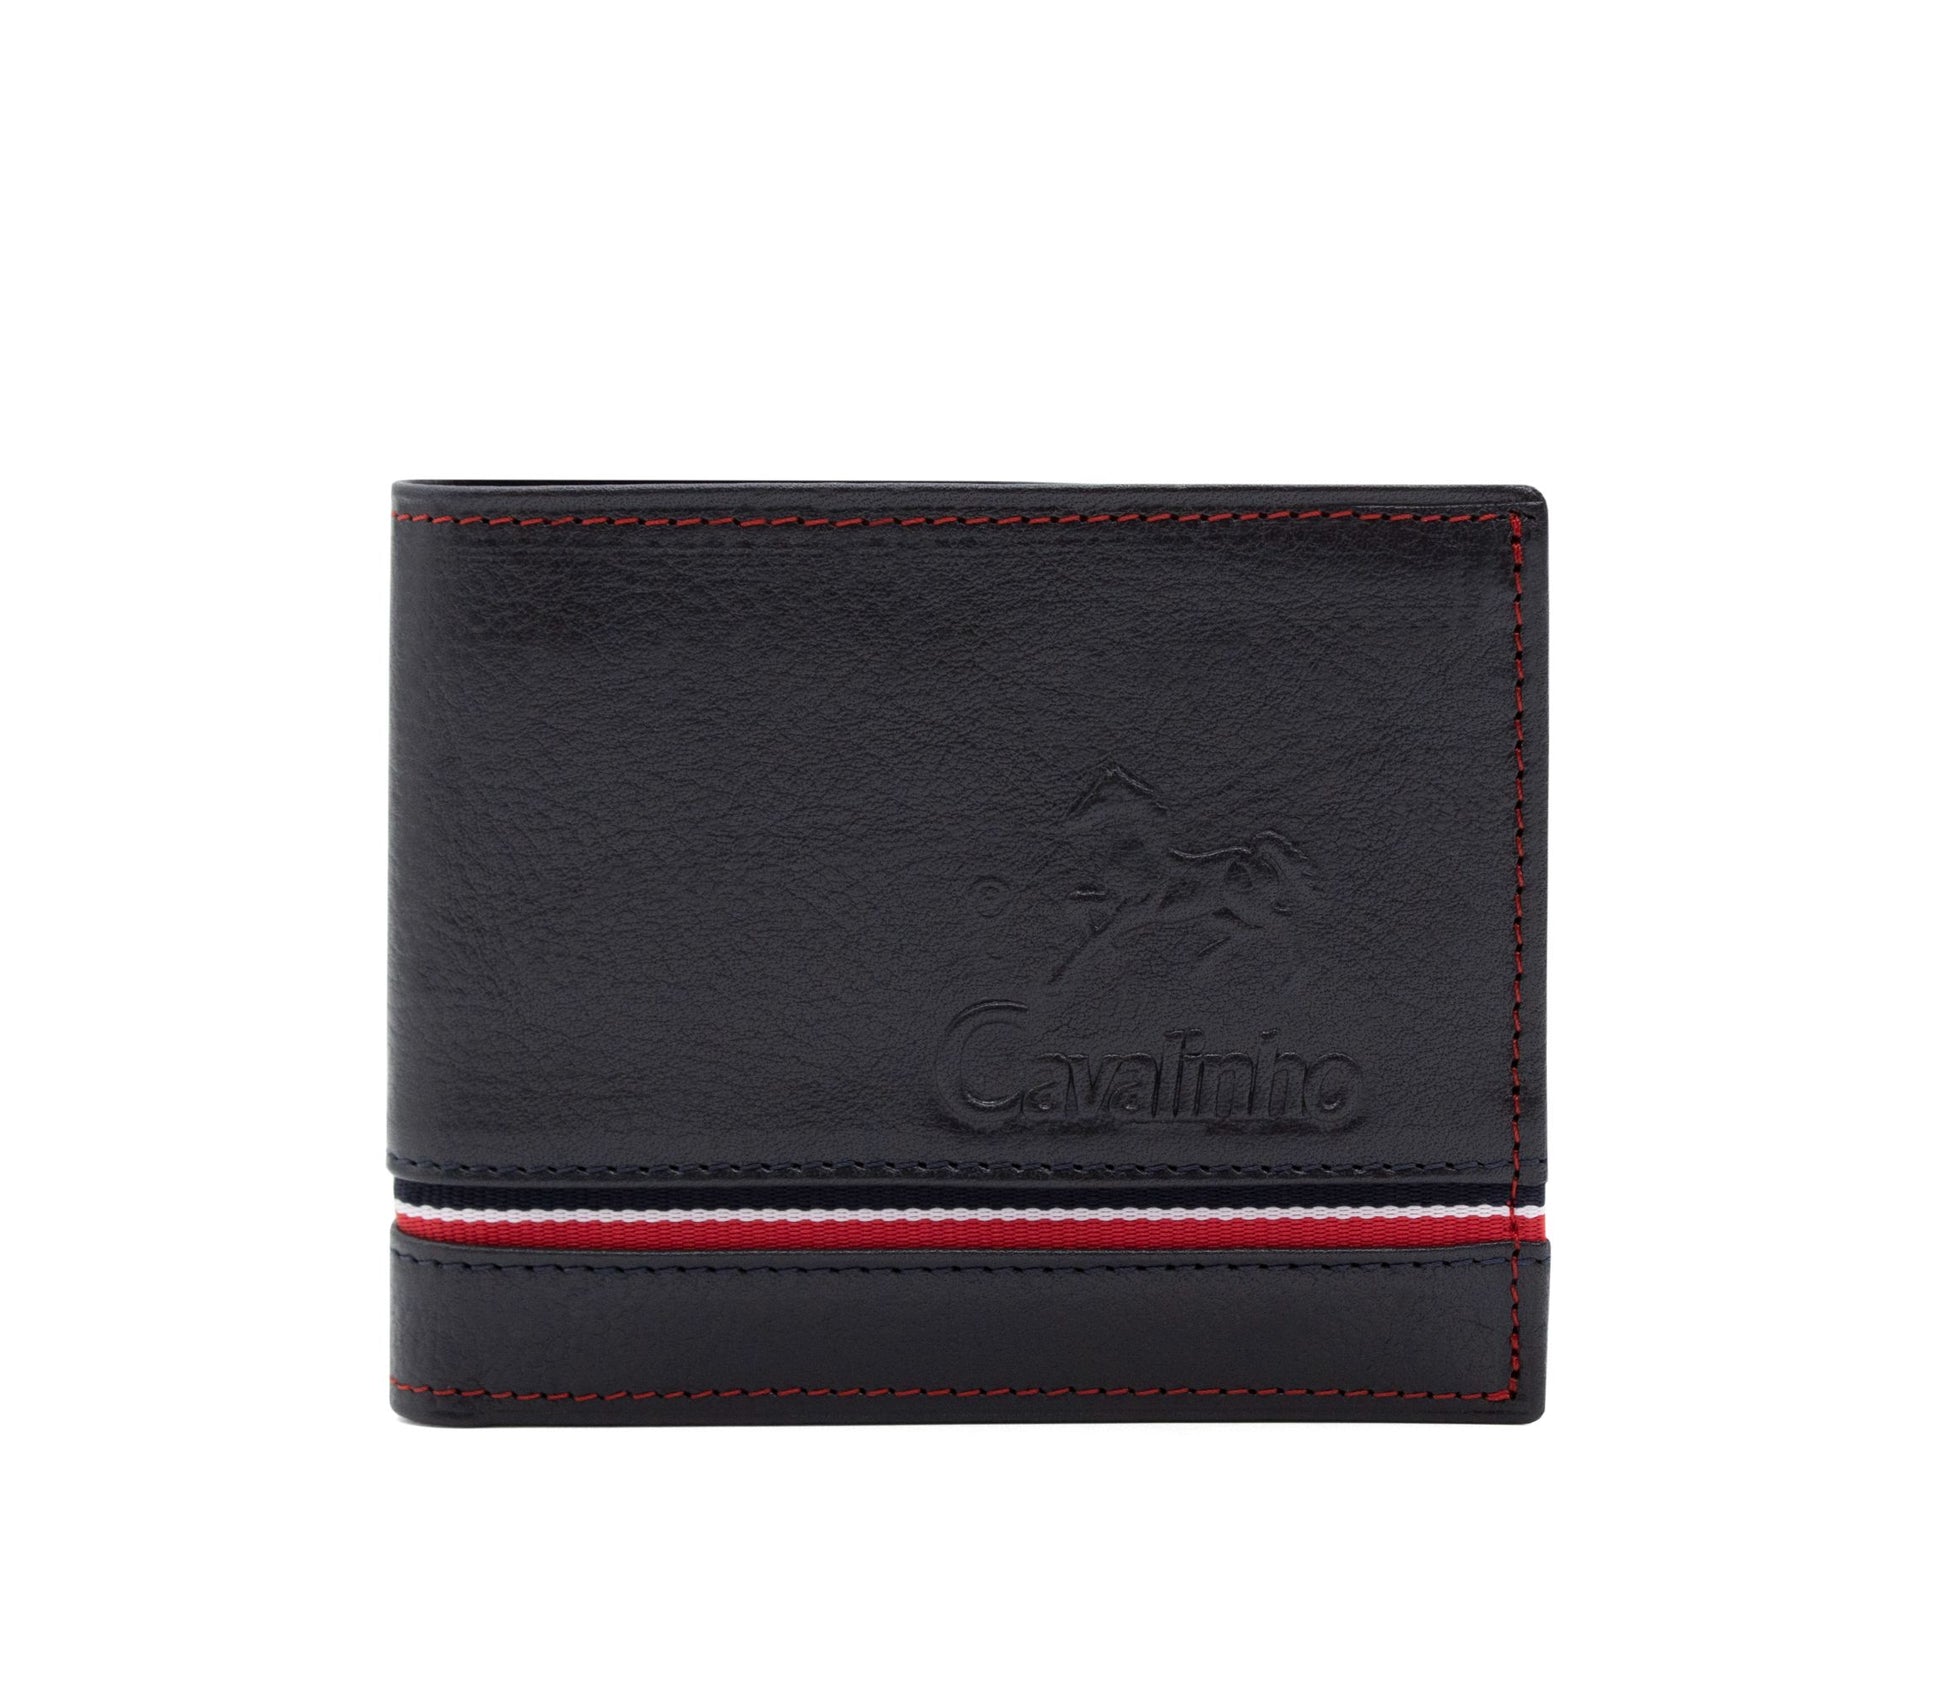 #color_ Navy | Cavalinho The Sailor Trifold Leather Wallet - Navy - 28150508.22_1